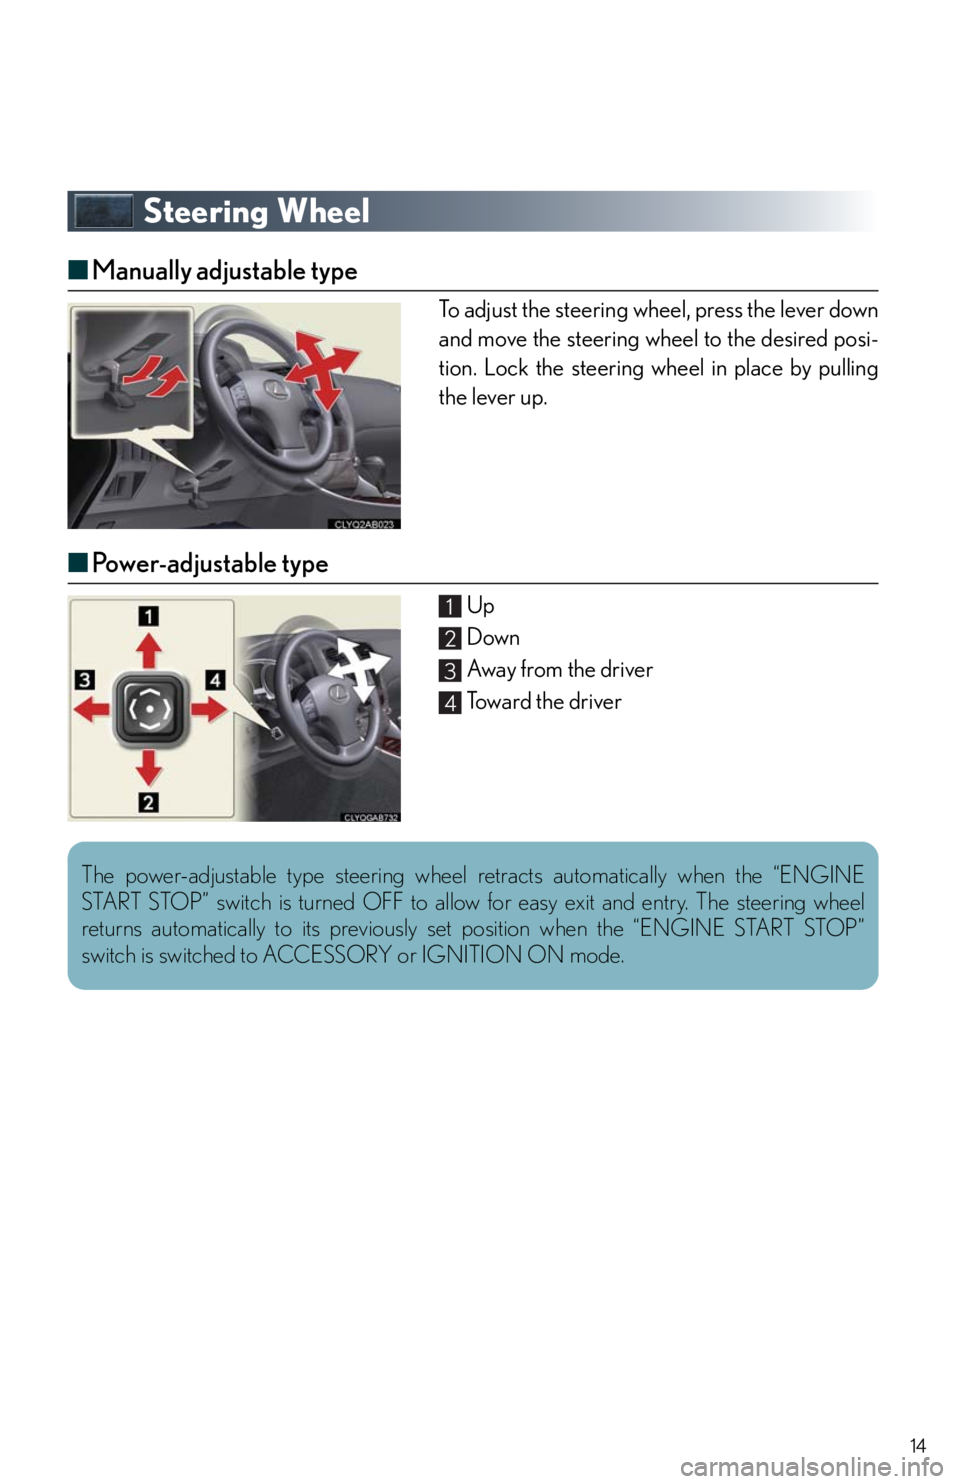 Lexus IS250 2010  Using The Air Conditioning System And Defogger / LEXUS 2010 IS350/250 QUICK GUIDE  (OM53812U) User Guide 14
Steering Wheel
■Manually adjustable type
To adjust the steering wheel, press the lever down
and move the steering wheel to the desired posi-
tion. Lock the steering wheel in place by pulling
the 